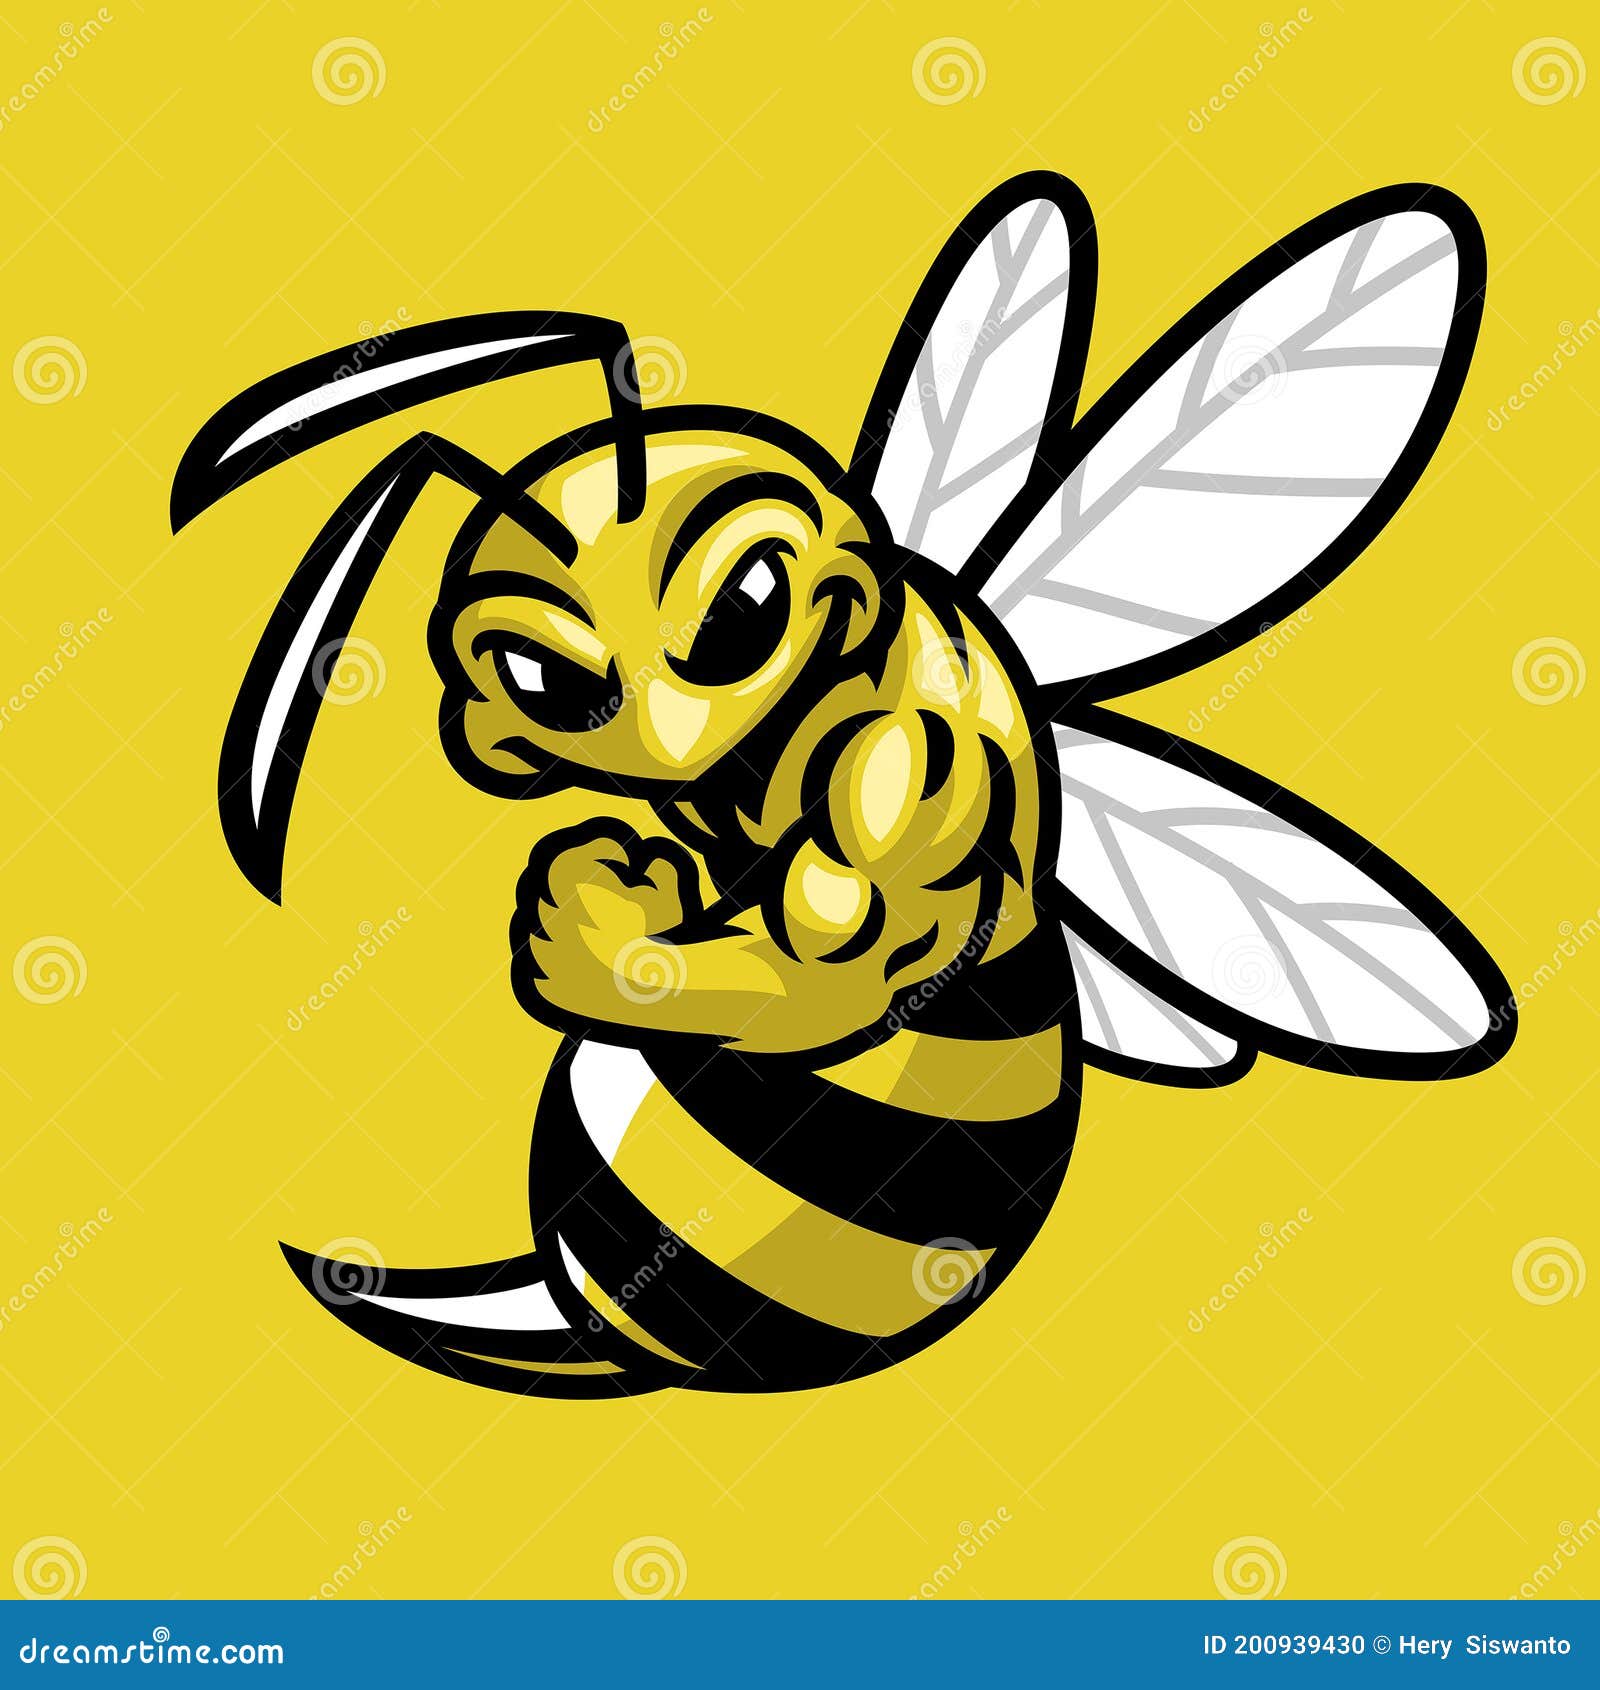 Page 9  Team Bee Images - Free Download on Freepik